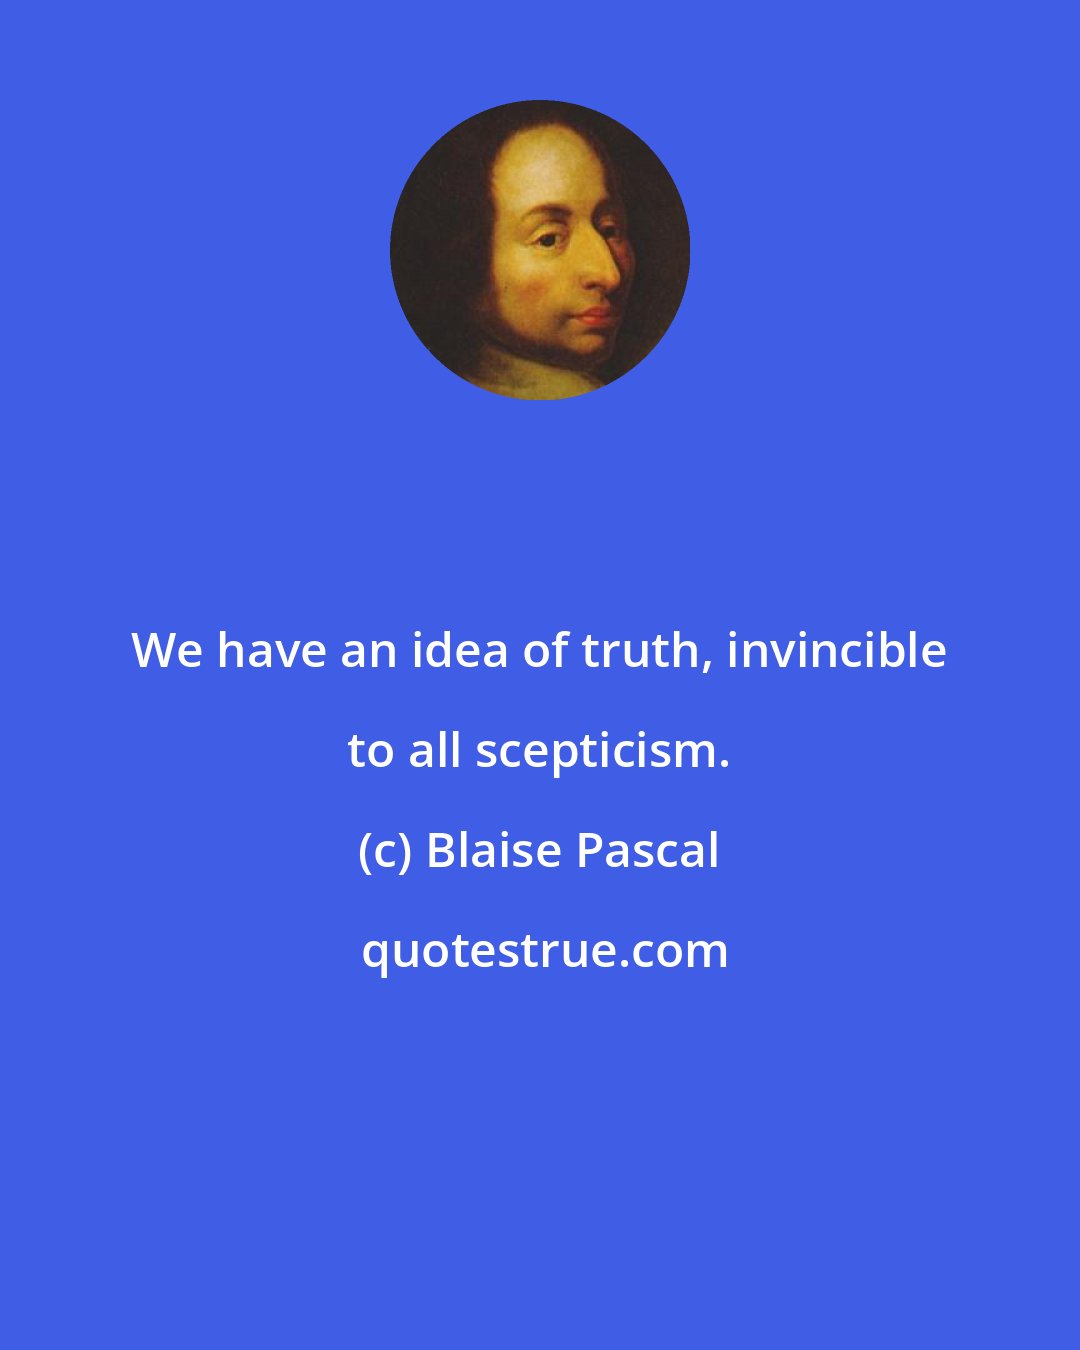 Blaise Pascal: We have an idea of truth, invincible to all scepticism.